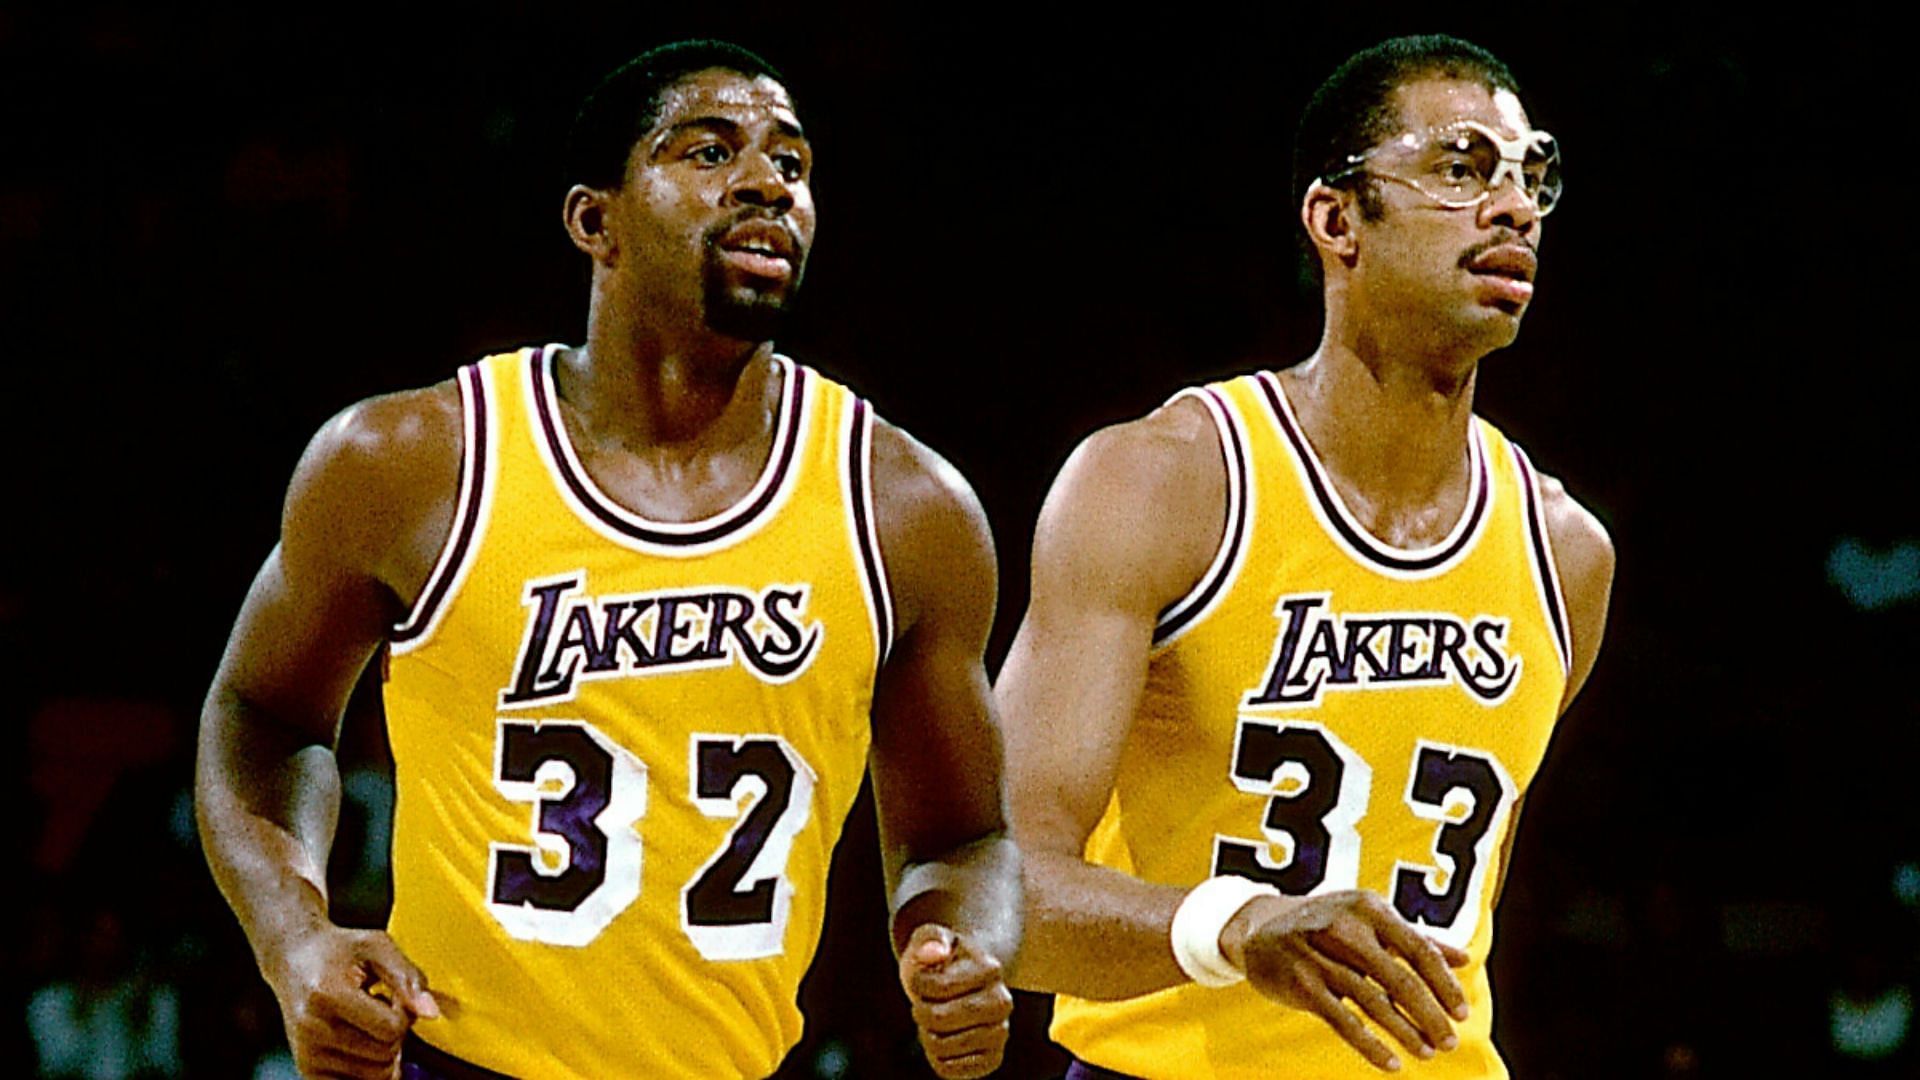 Kareem Abdul-Jabbar and Magic Johnson made the LA Lakers the team to beat in the 80s. [Sporting News]